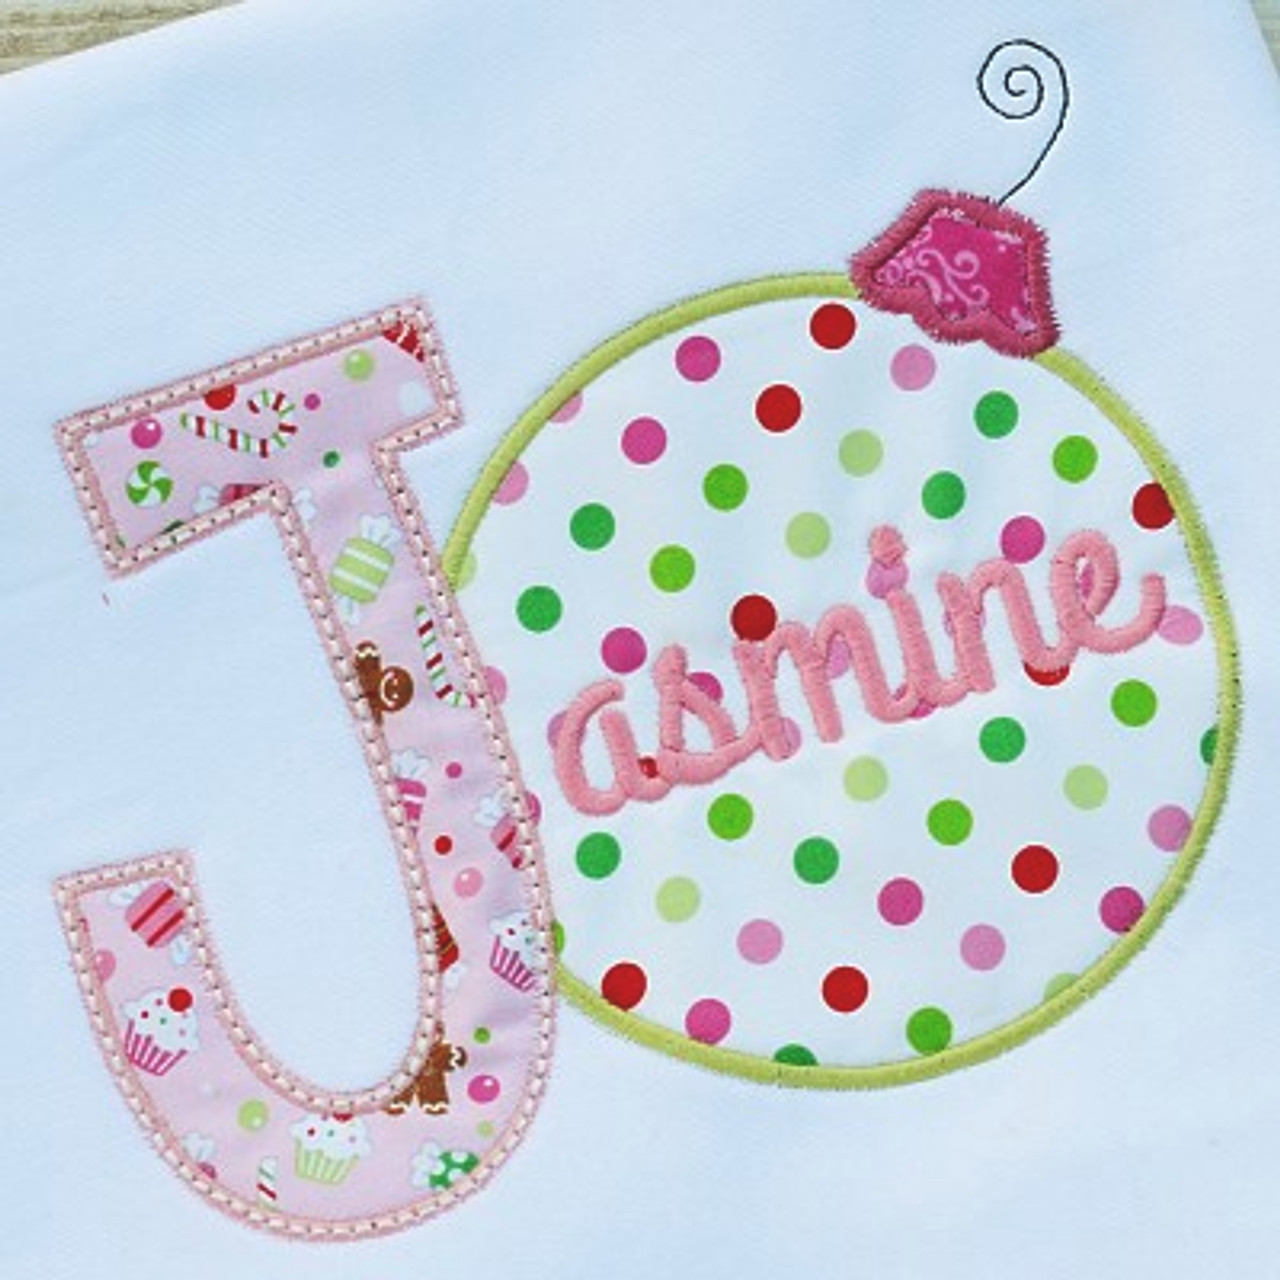 Applique Embroidery Ideas - Girl Stuff Machine Embroidery